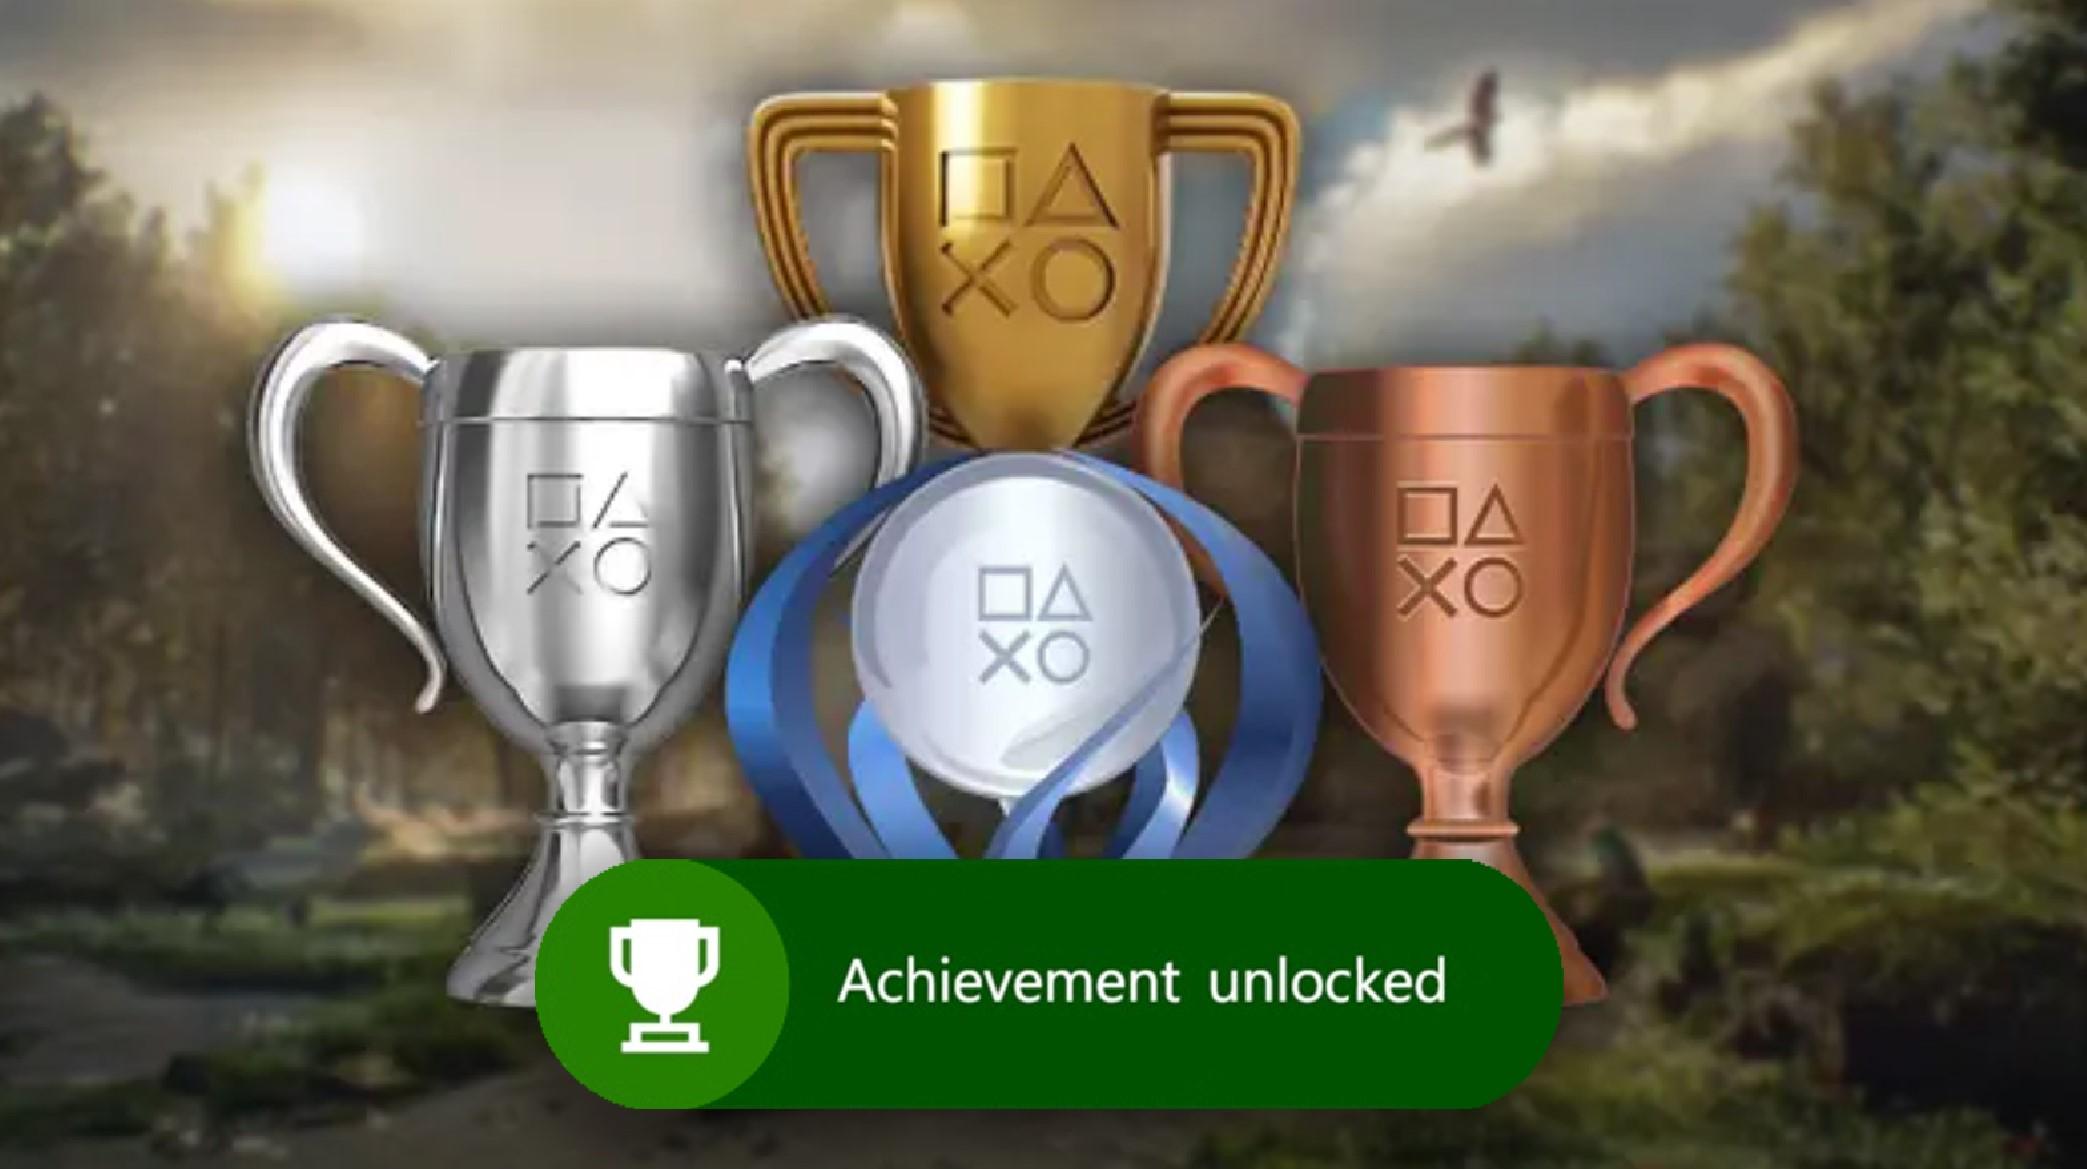 All Hogwarts Legacy Achievements & Trophies: 46 challenges to complete  in-game - Dexerto